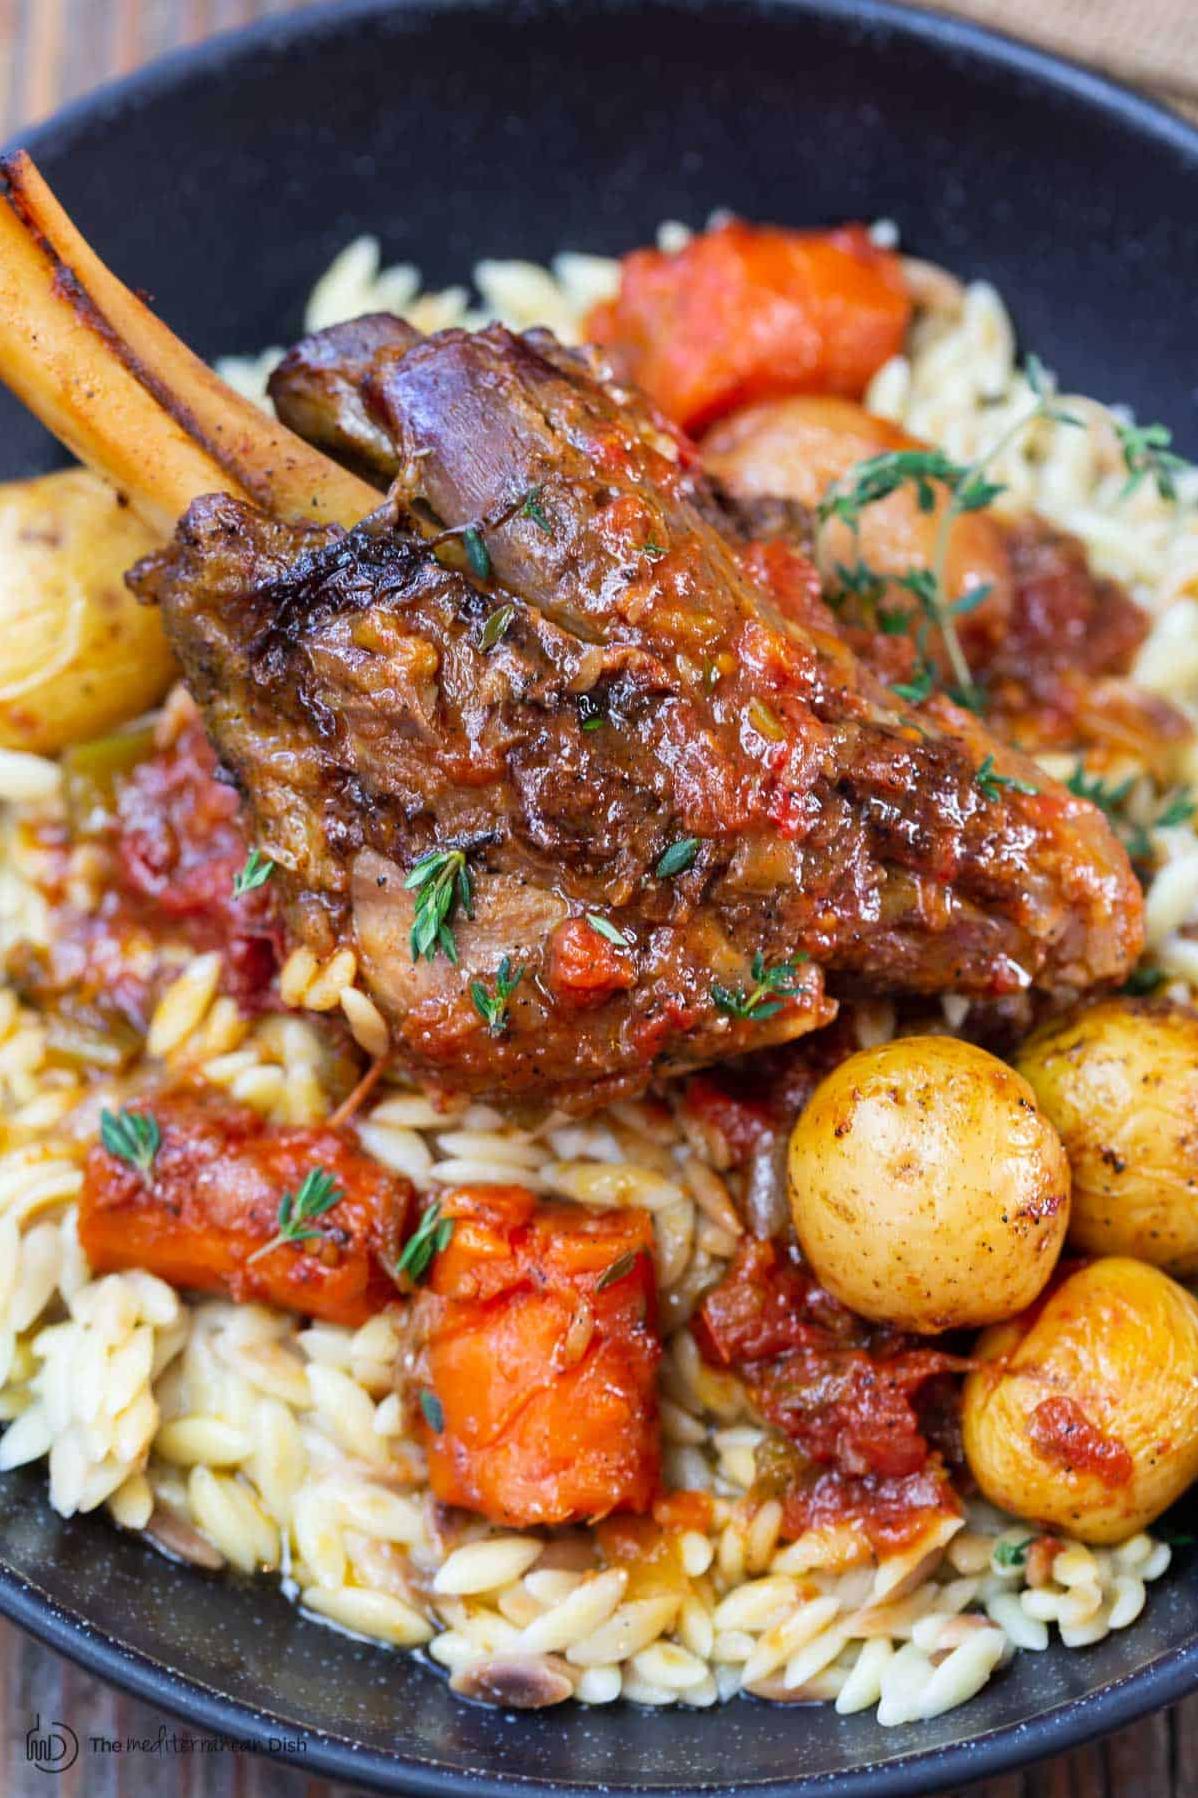  Tender lamb shanks braised to perfection with a savory Turkish-style sauce.